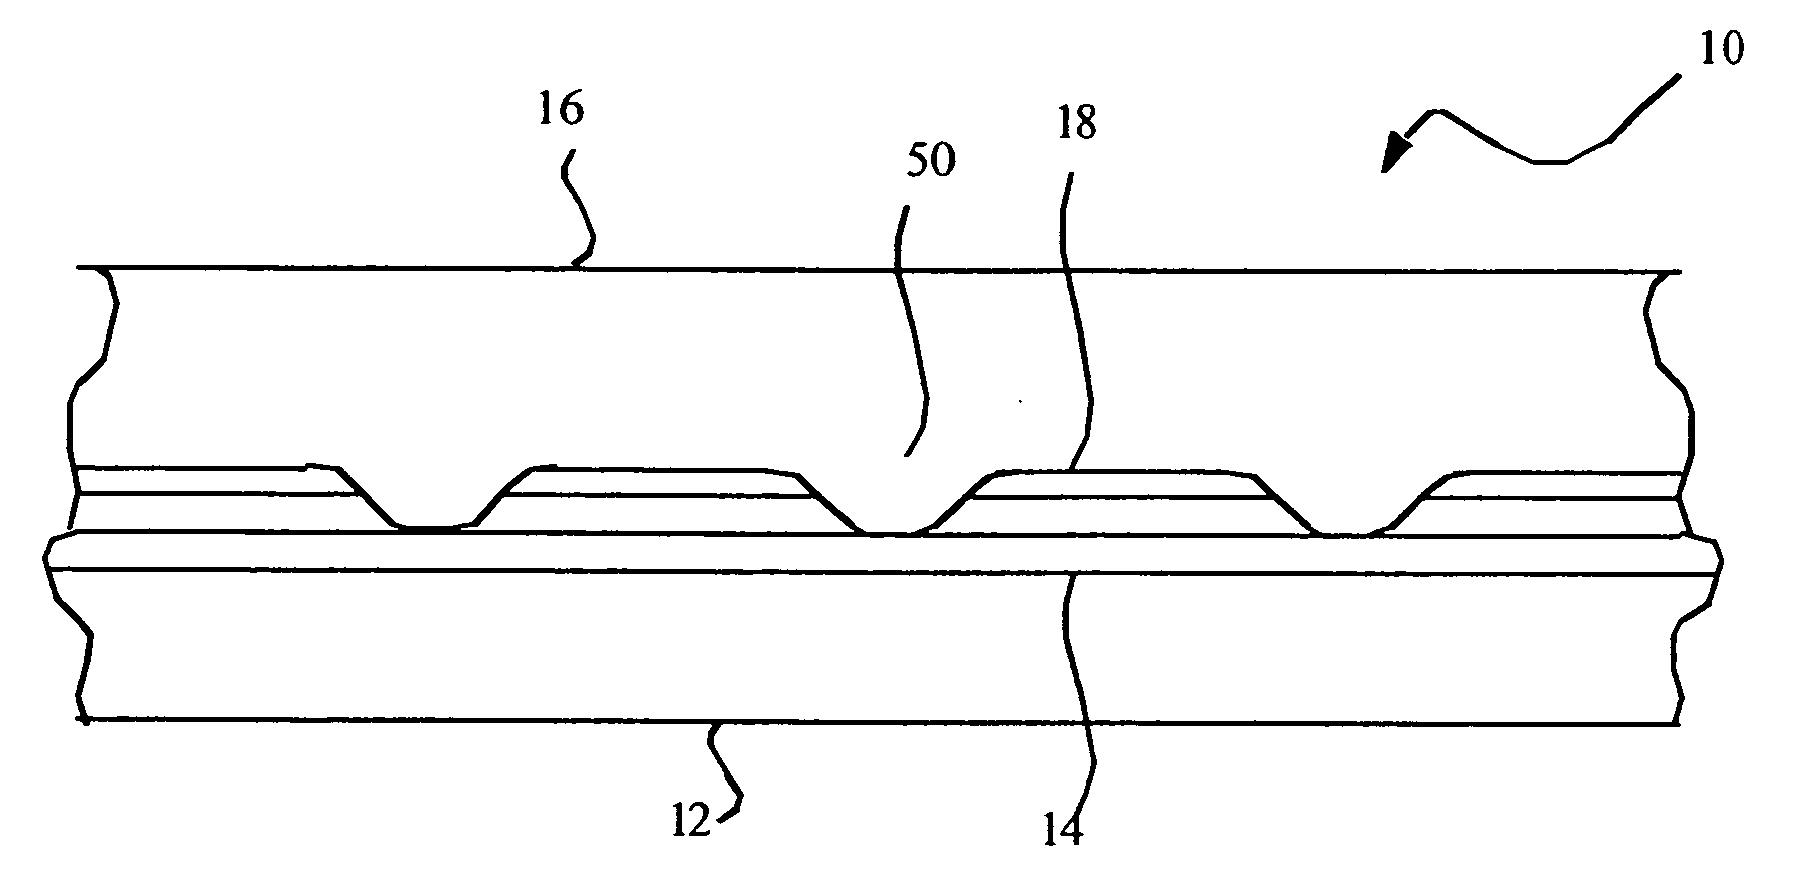 Resistive touch screen having conductive mesh